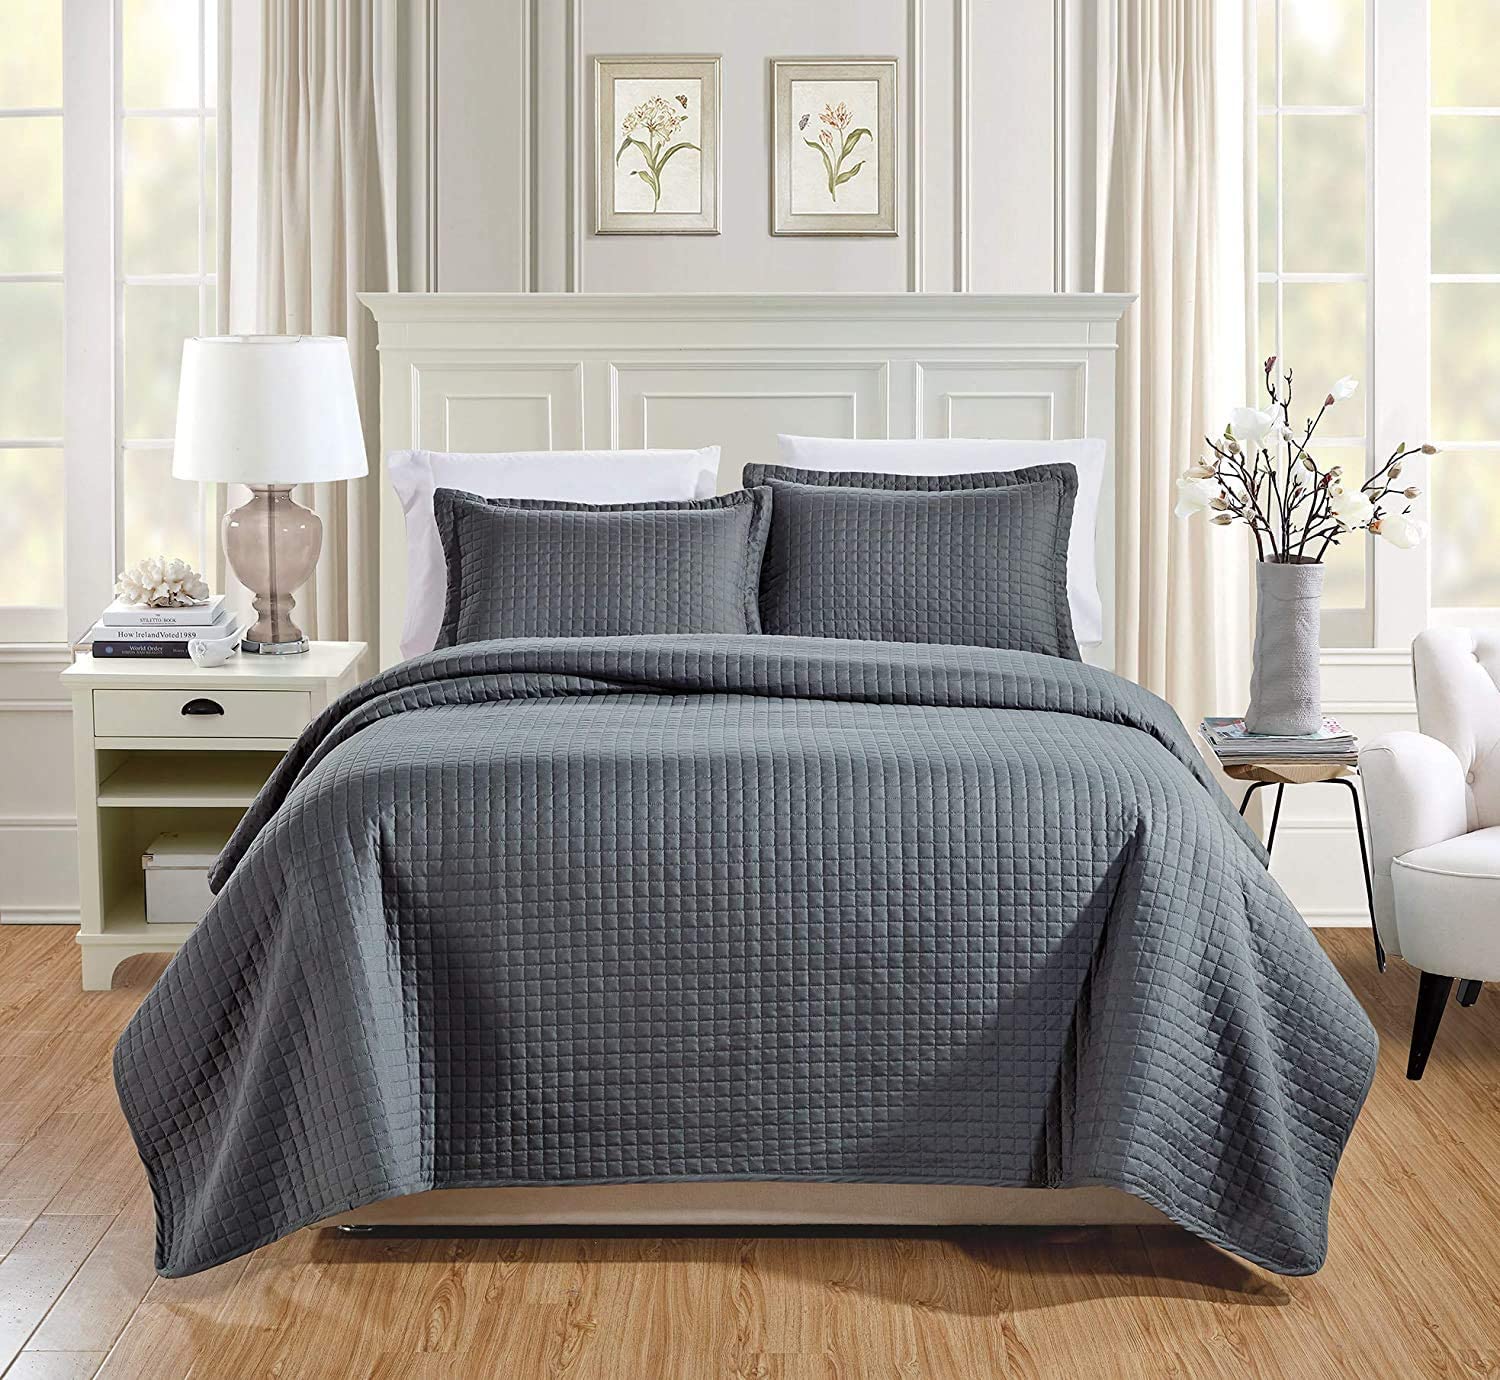 Chezmoi Collection Zoe 3-Piece Chevron Zig Zag Channel Quilted Bedspread Coverlet Set Gray, Queen